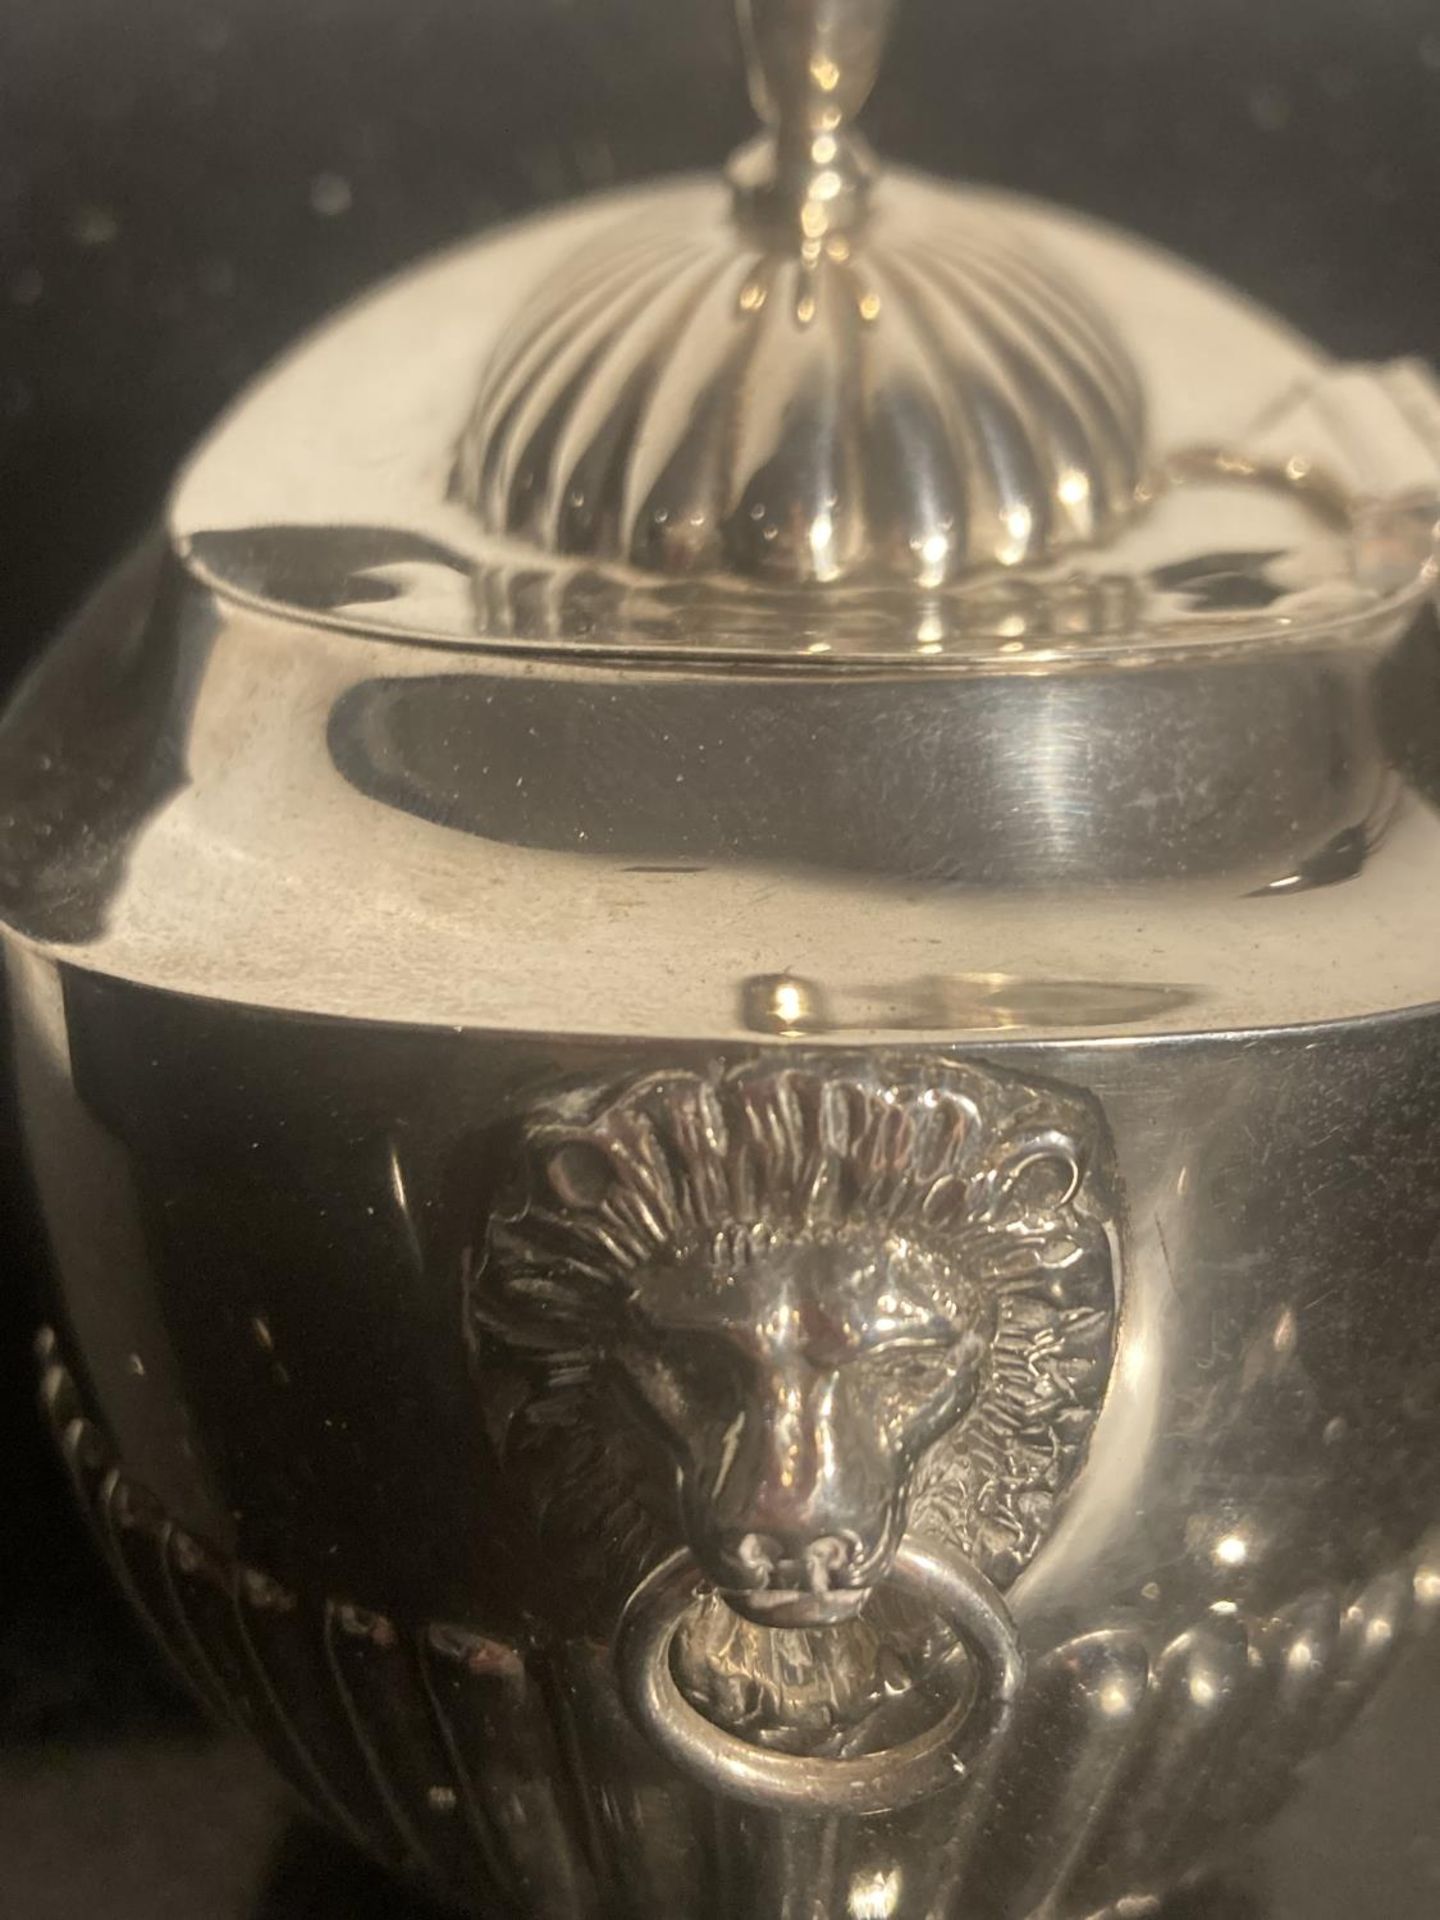 A HALLMARKED BIRMINGHAM SILVER LOOSE TEA CADDY GROSS WEIGHT 210 GRAMS - Image 3 of 5